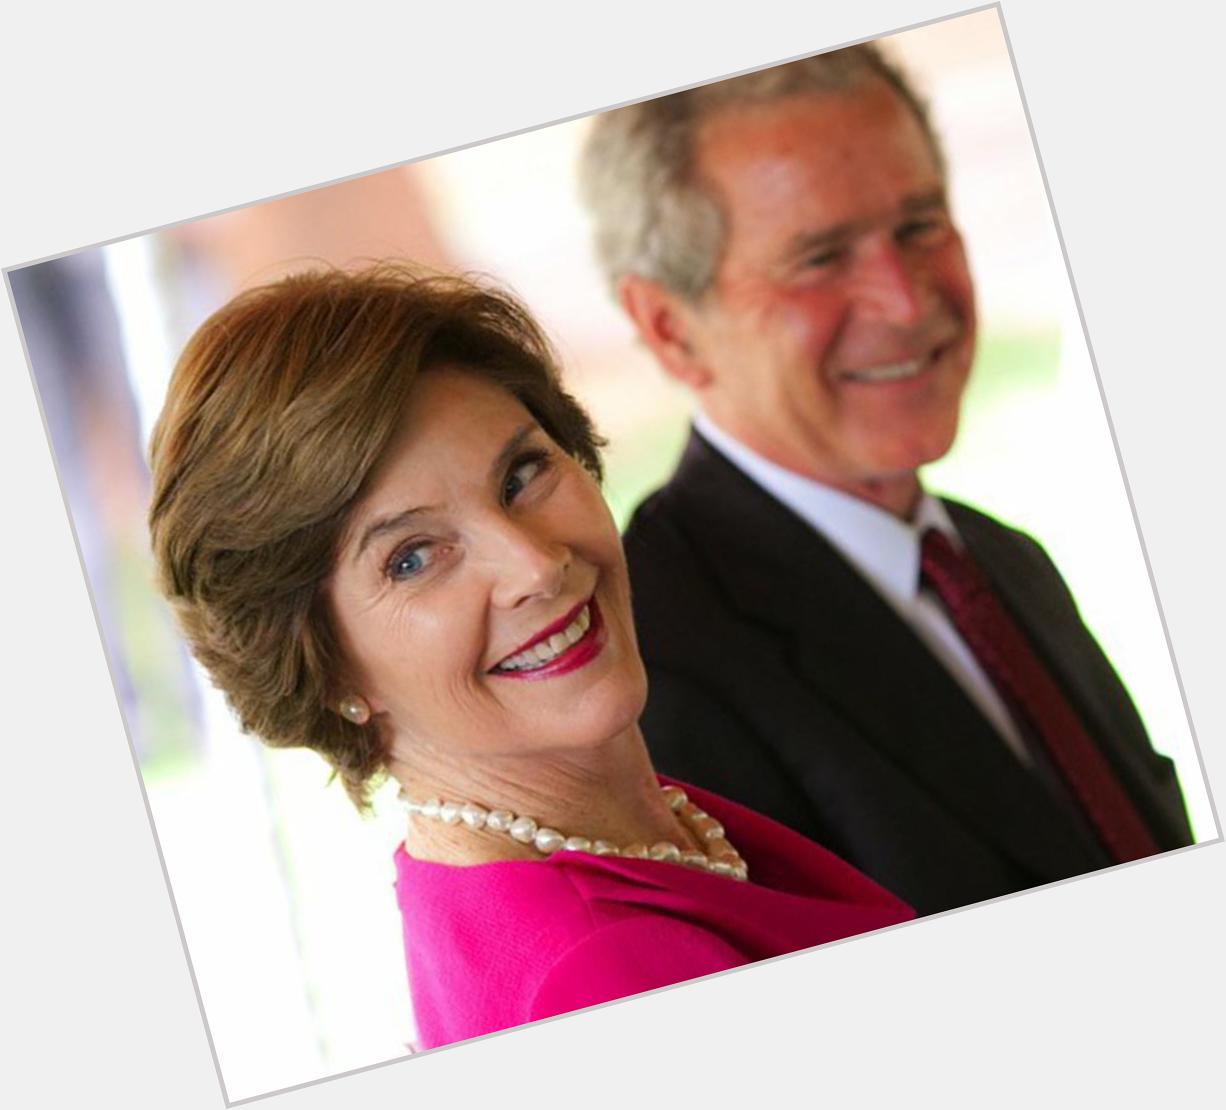 Wishing a very Happy Birthday to former First Lady Laura Bush! 